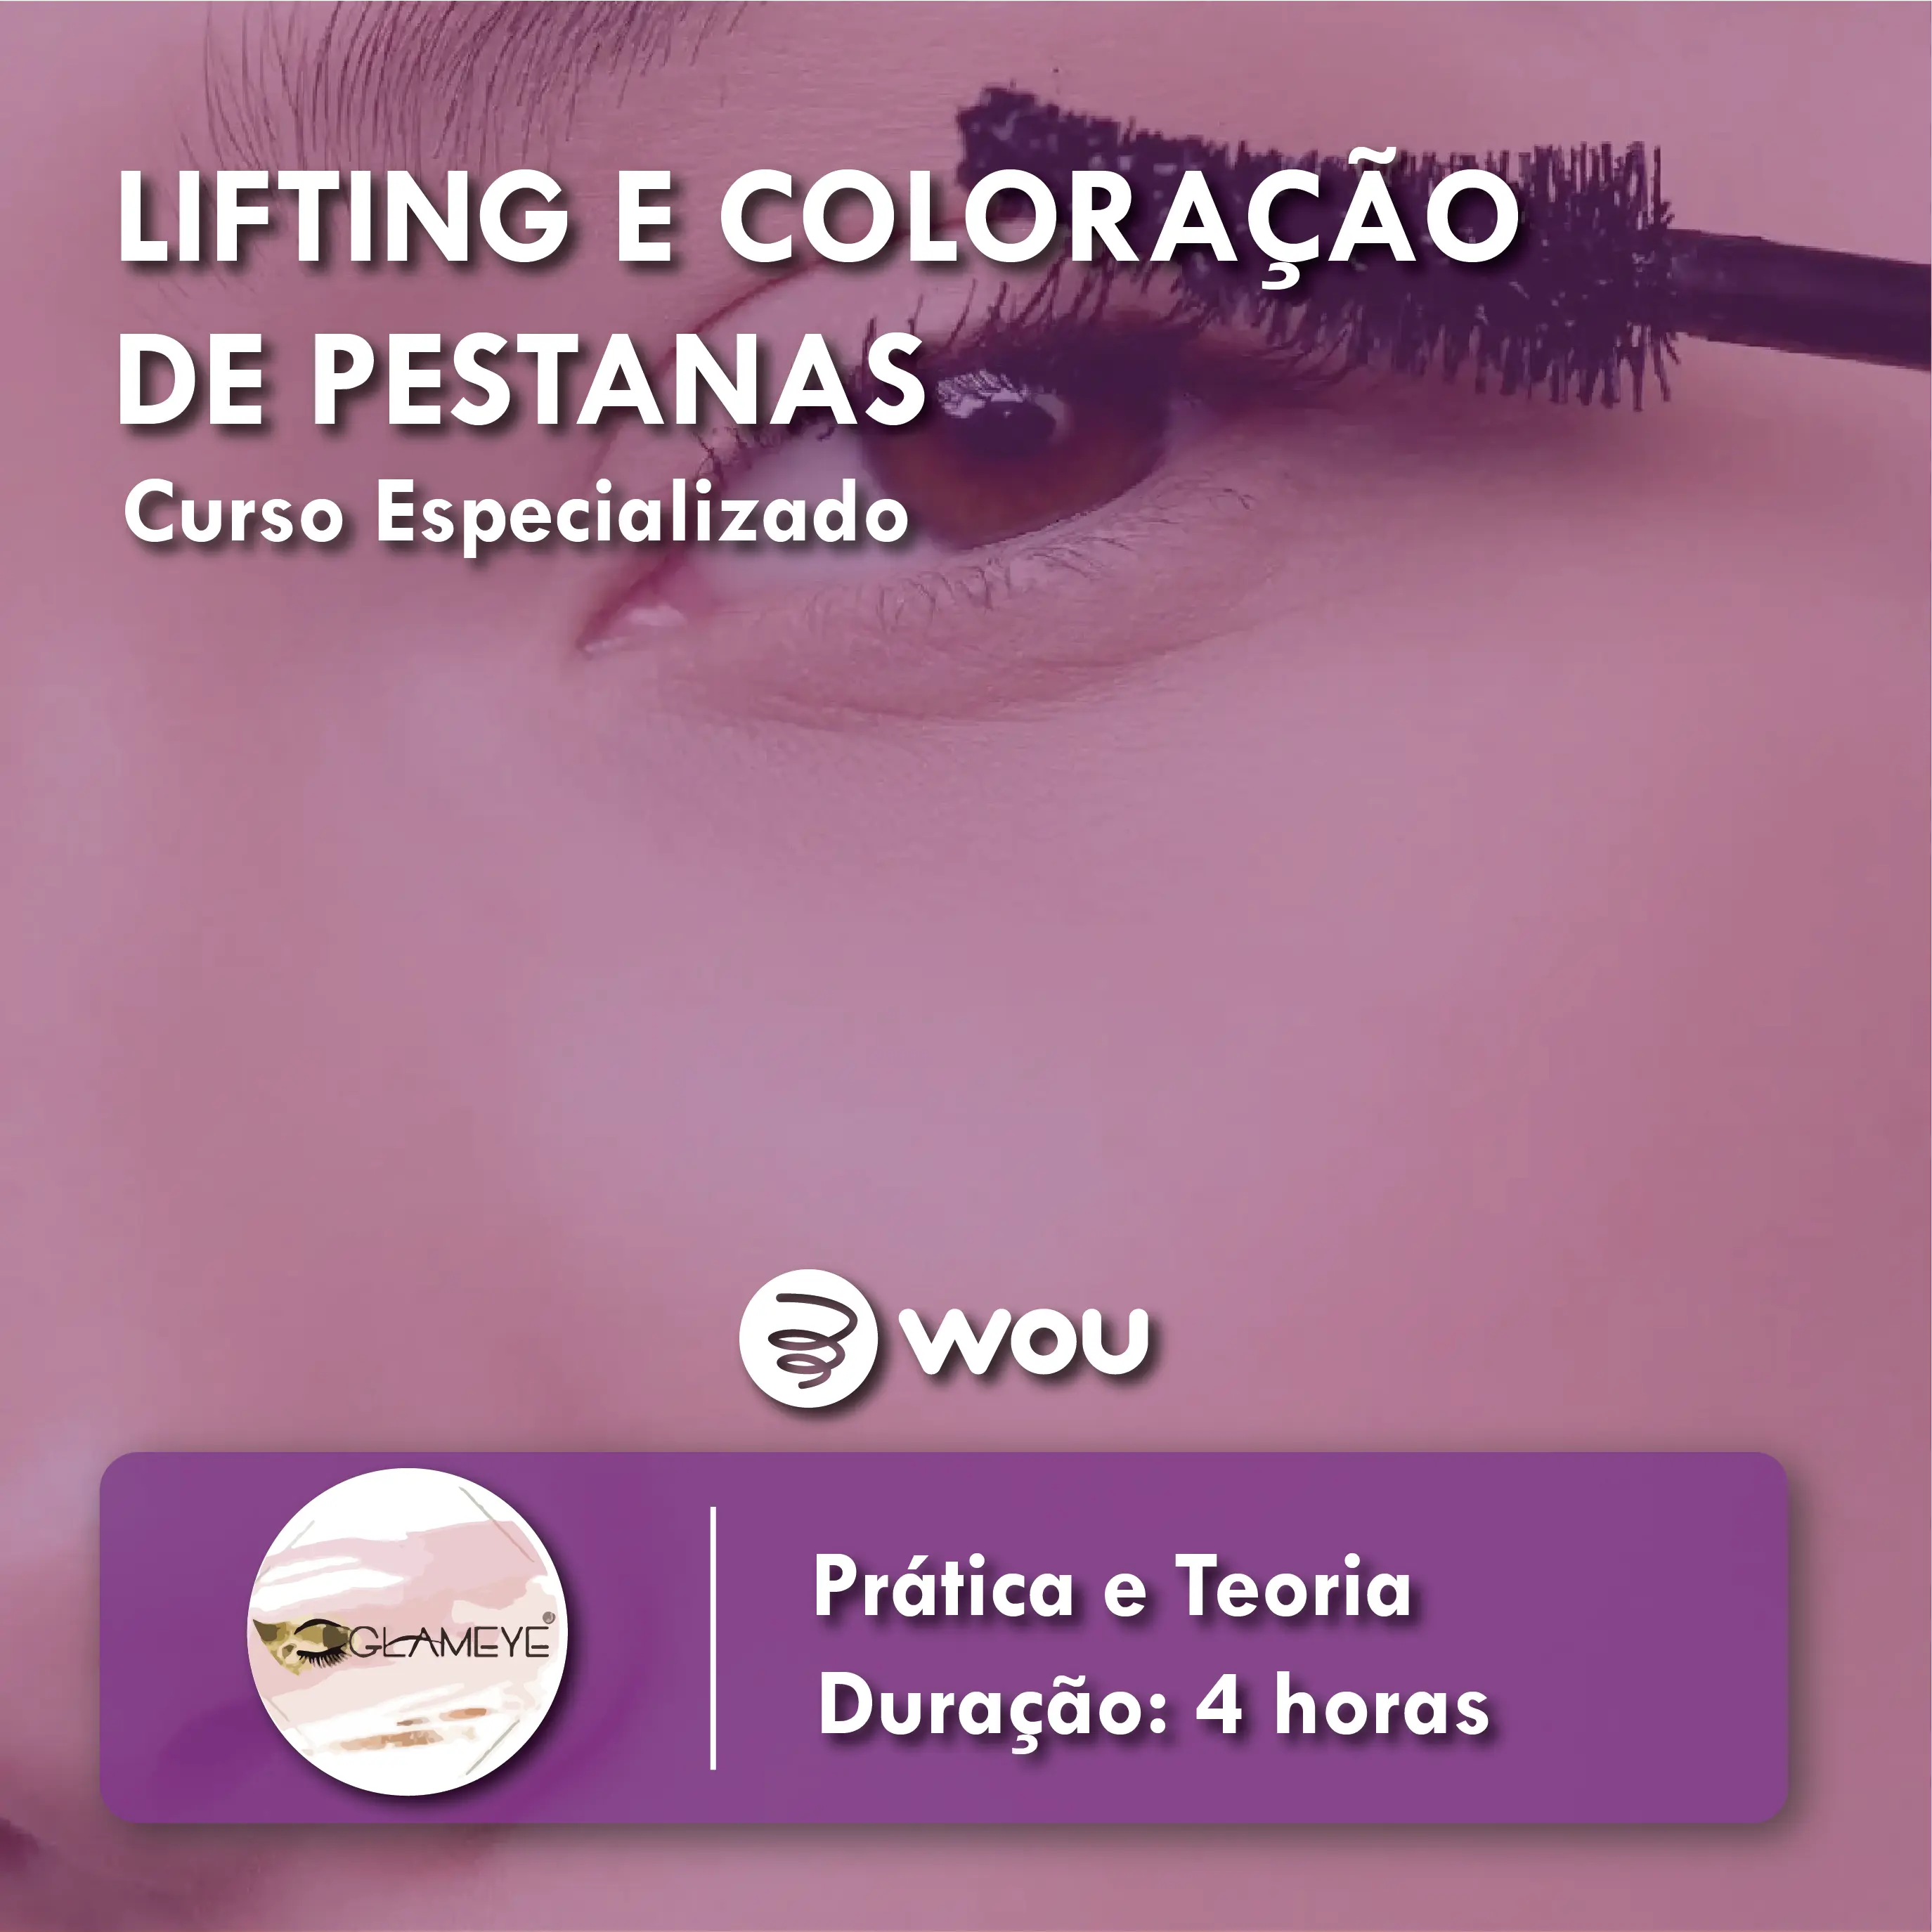 Eyelash Lifting and Coloring Course in Porto